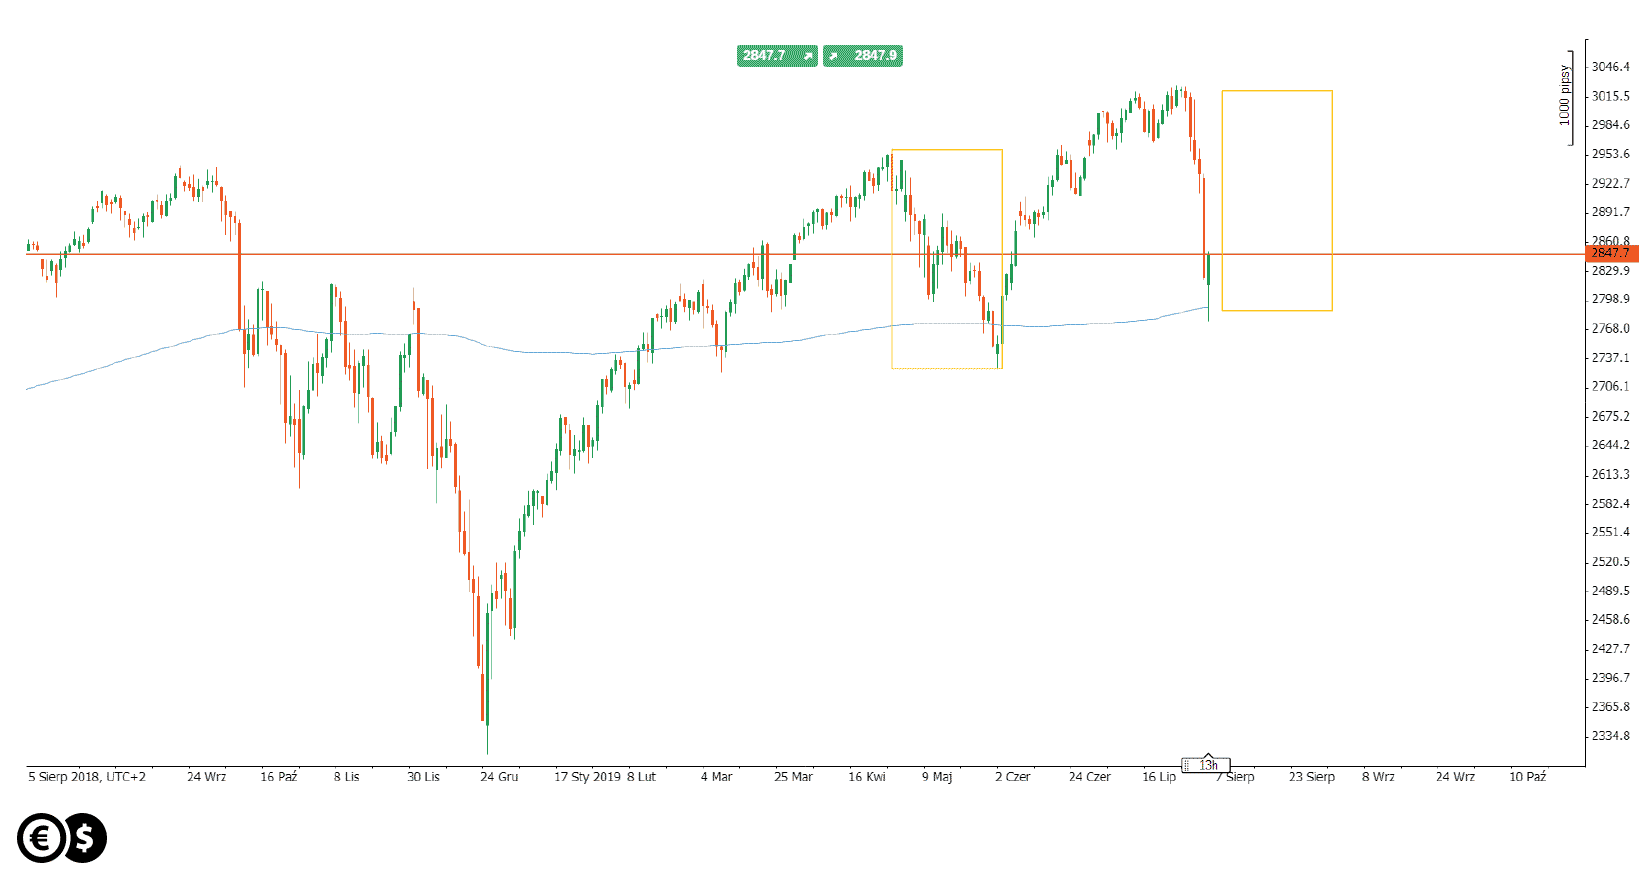 Daily chart of the S&P 500